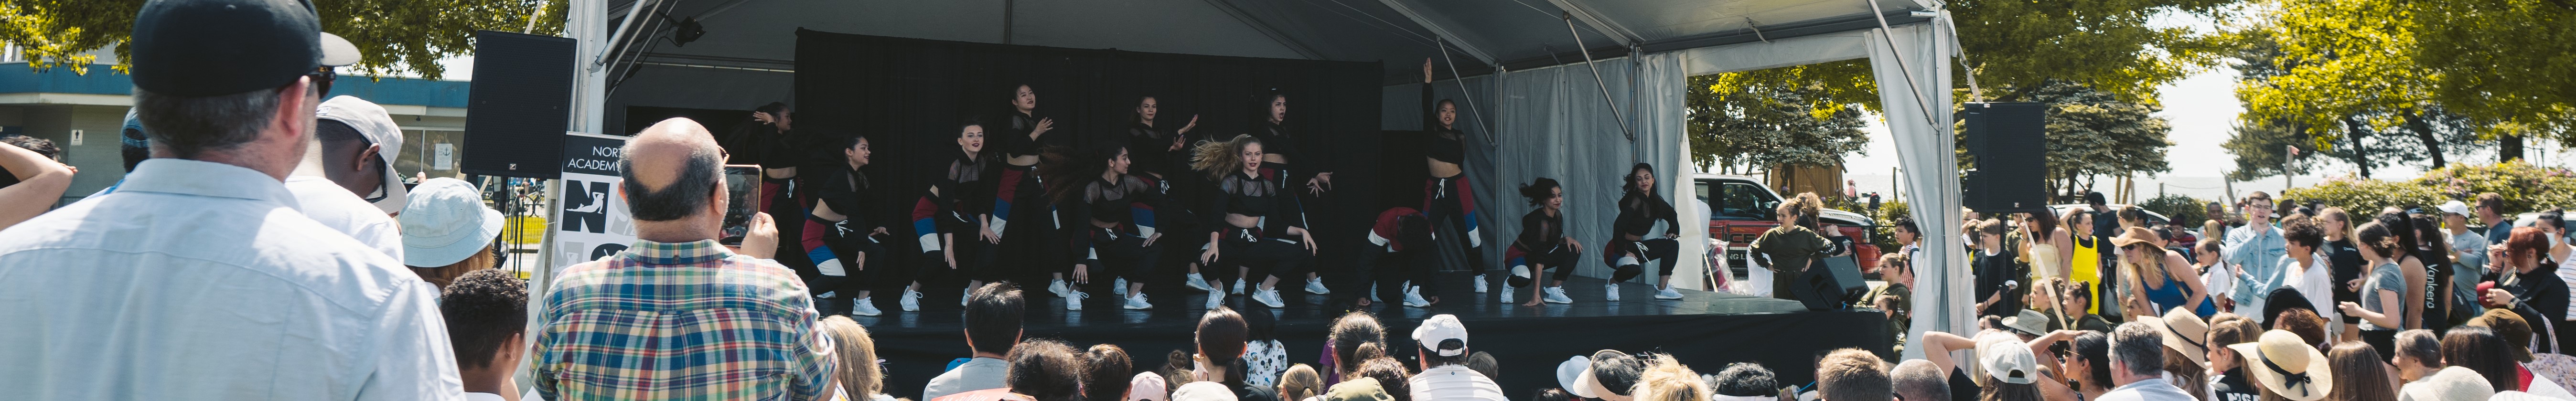 The image is of a group of people on a dance stage at the festival. They are standing and wearing different types of clothing.